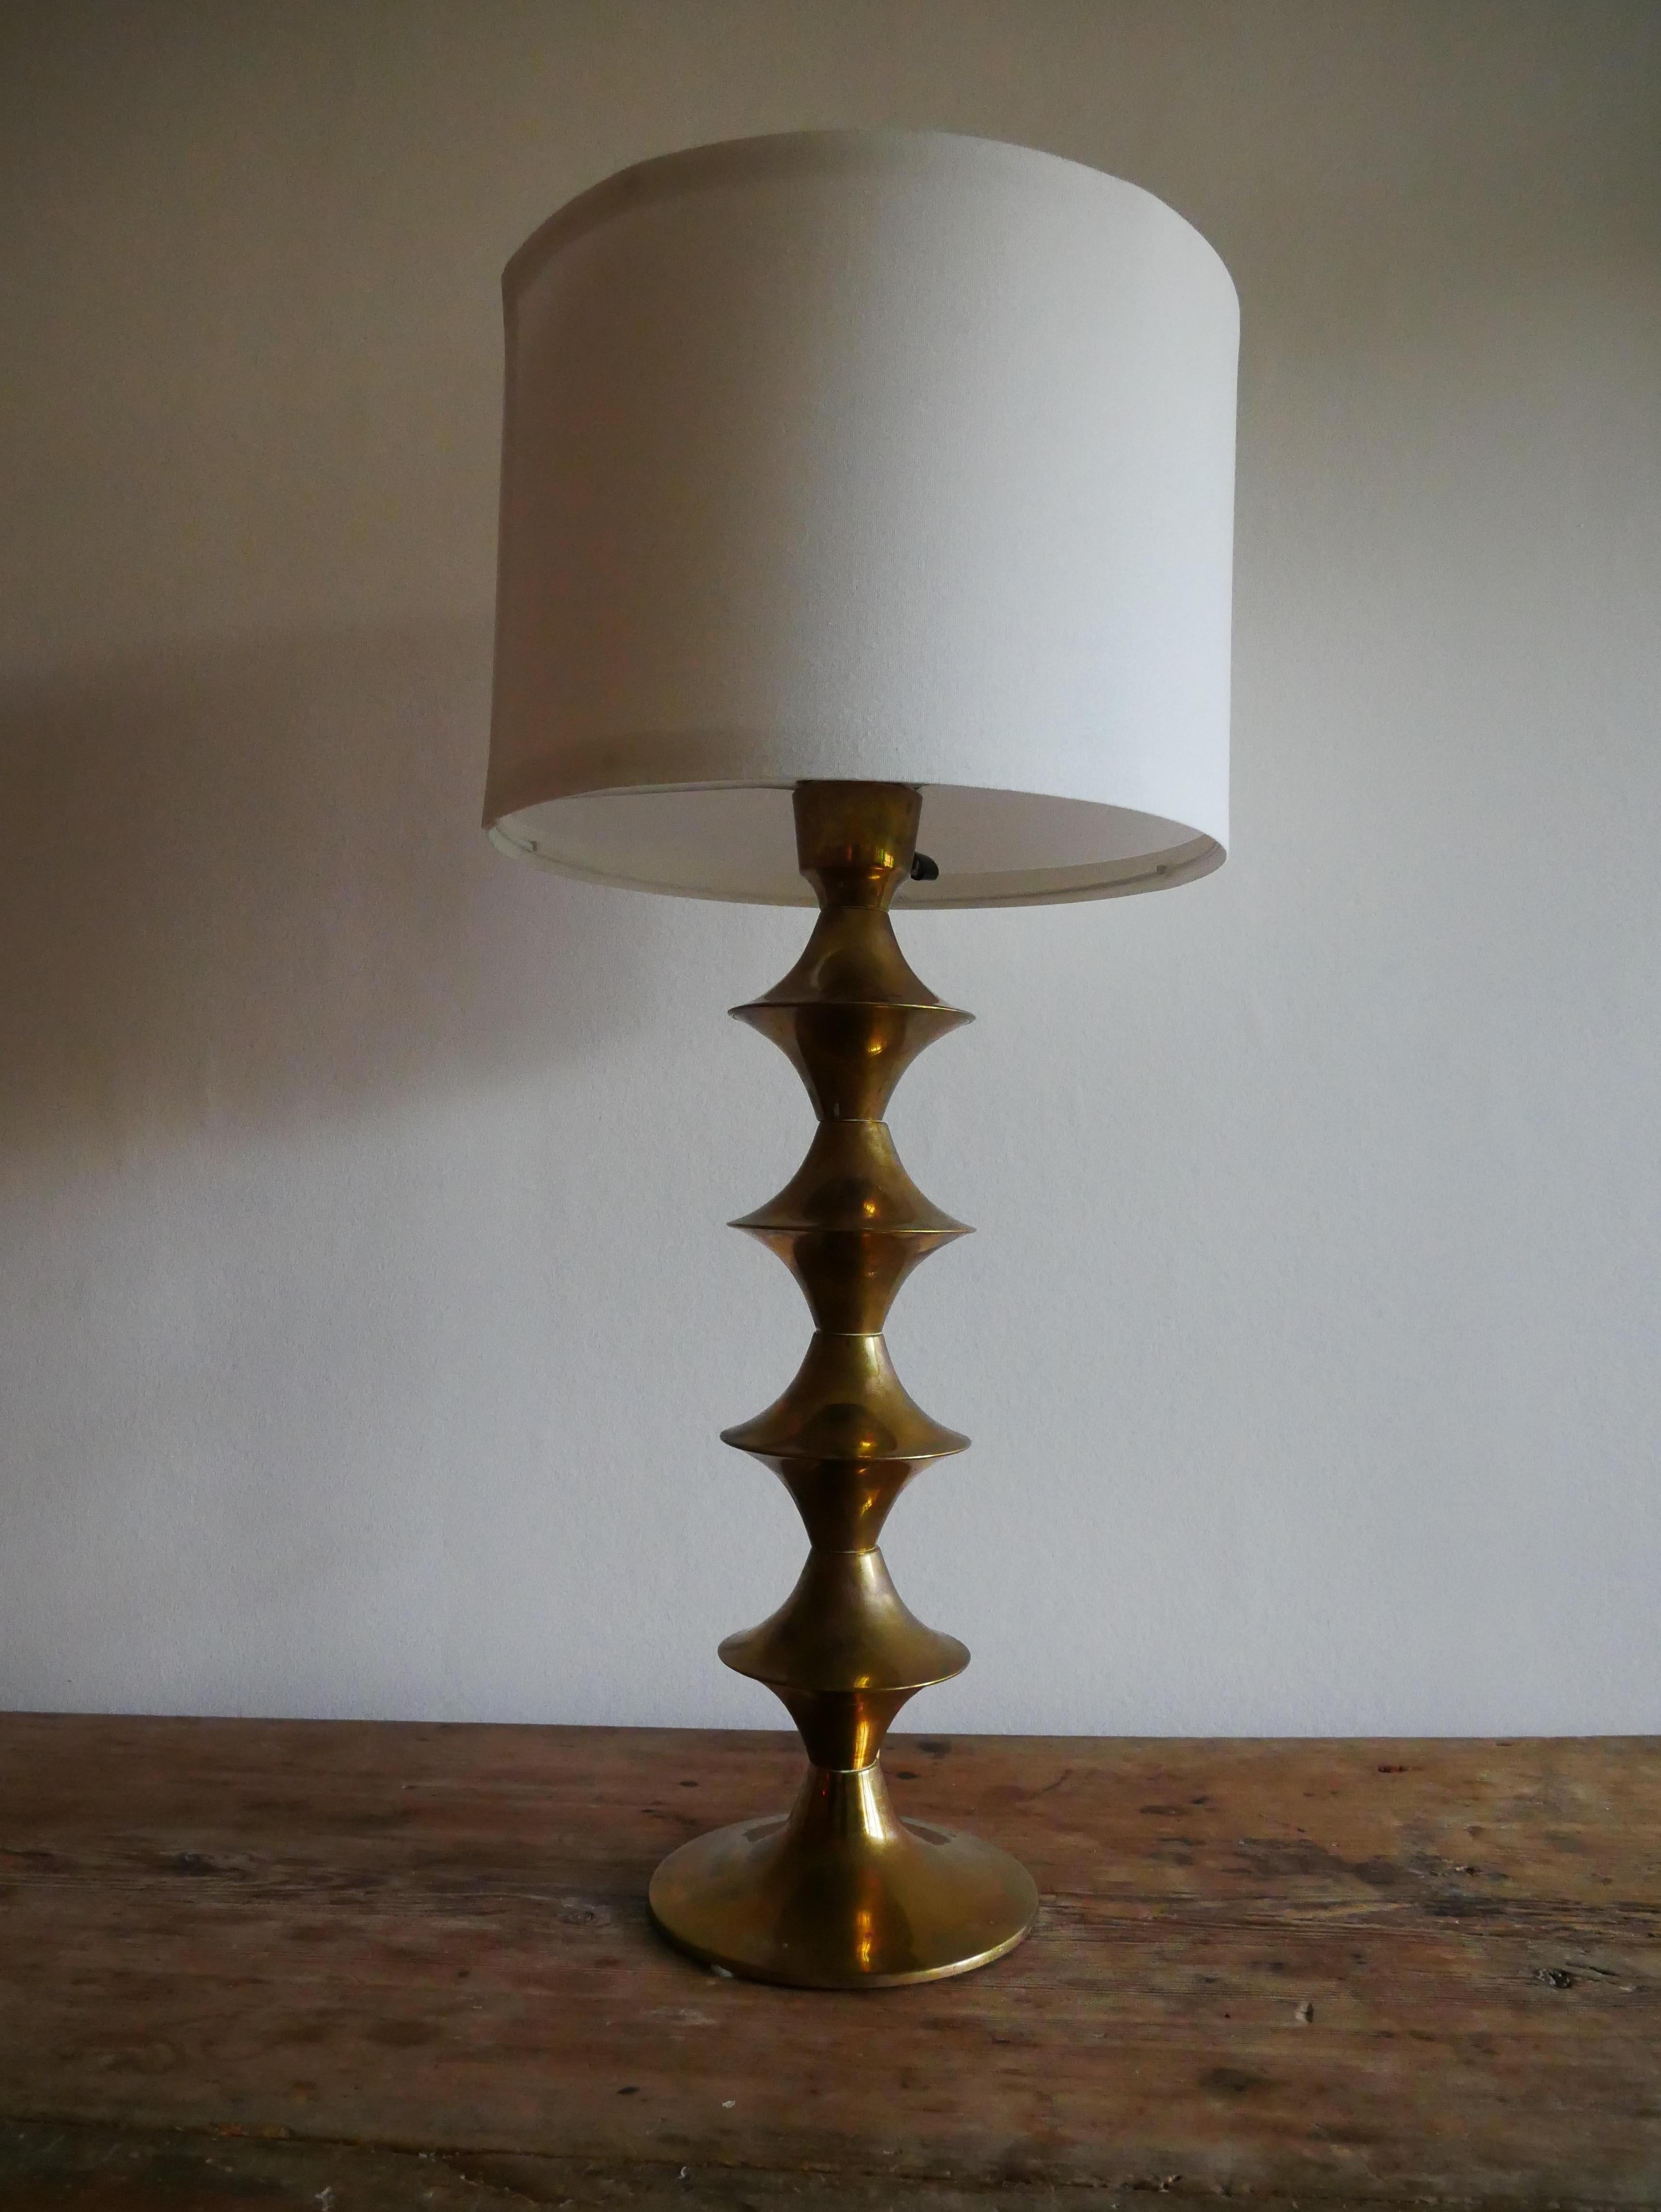 Elit AB Floor Lamp, made in Sweden 1960's.

Heavy patinated brass lamp with stunning shape.

Height: 52 cm
Diameter: 17 cm

Lampshade is not included.